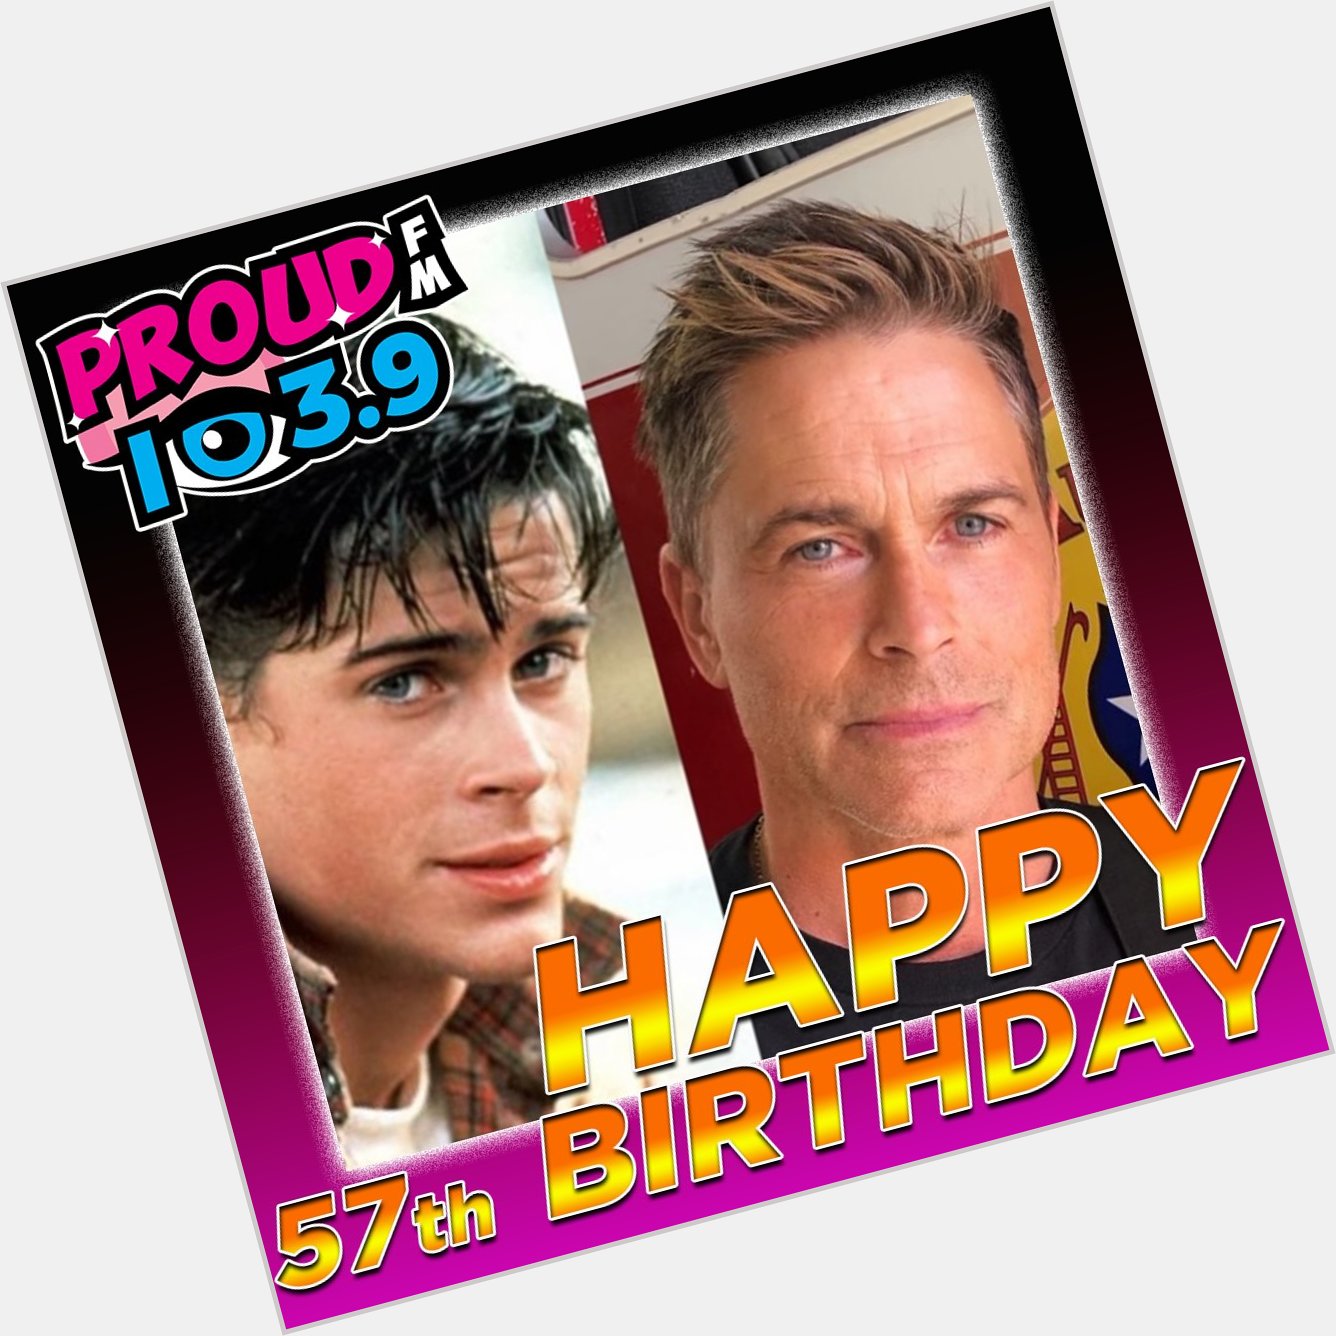 He never ages!  He is only getting better, A big 
HAPPY 57TH BIRTHDAY TO ROB LOWE!   